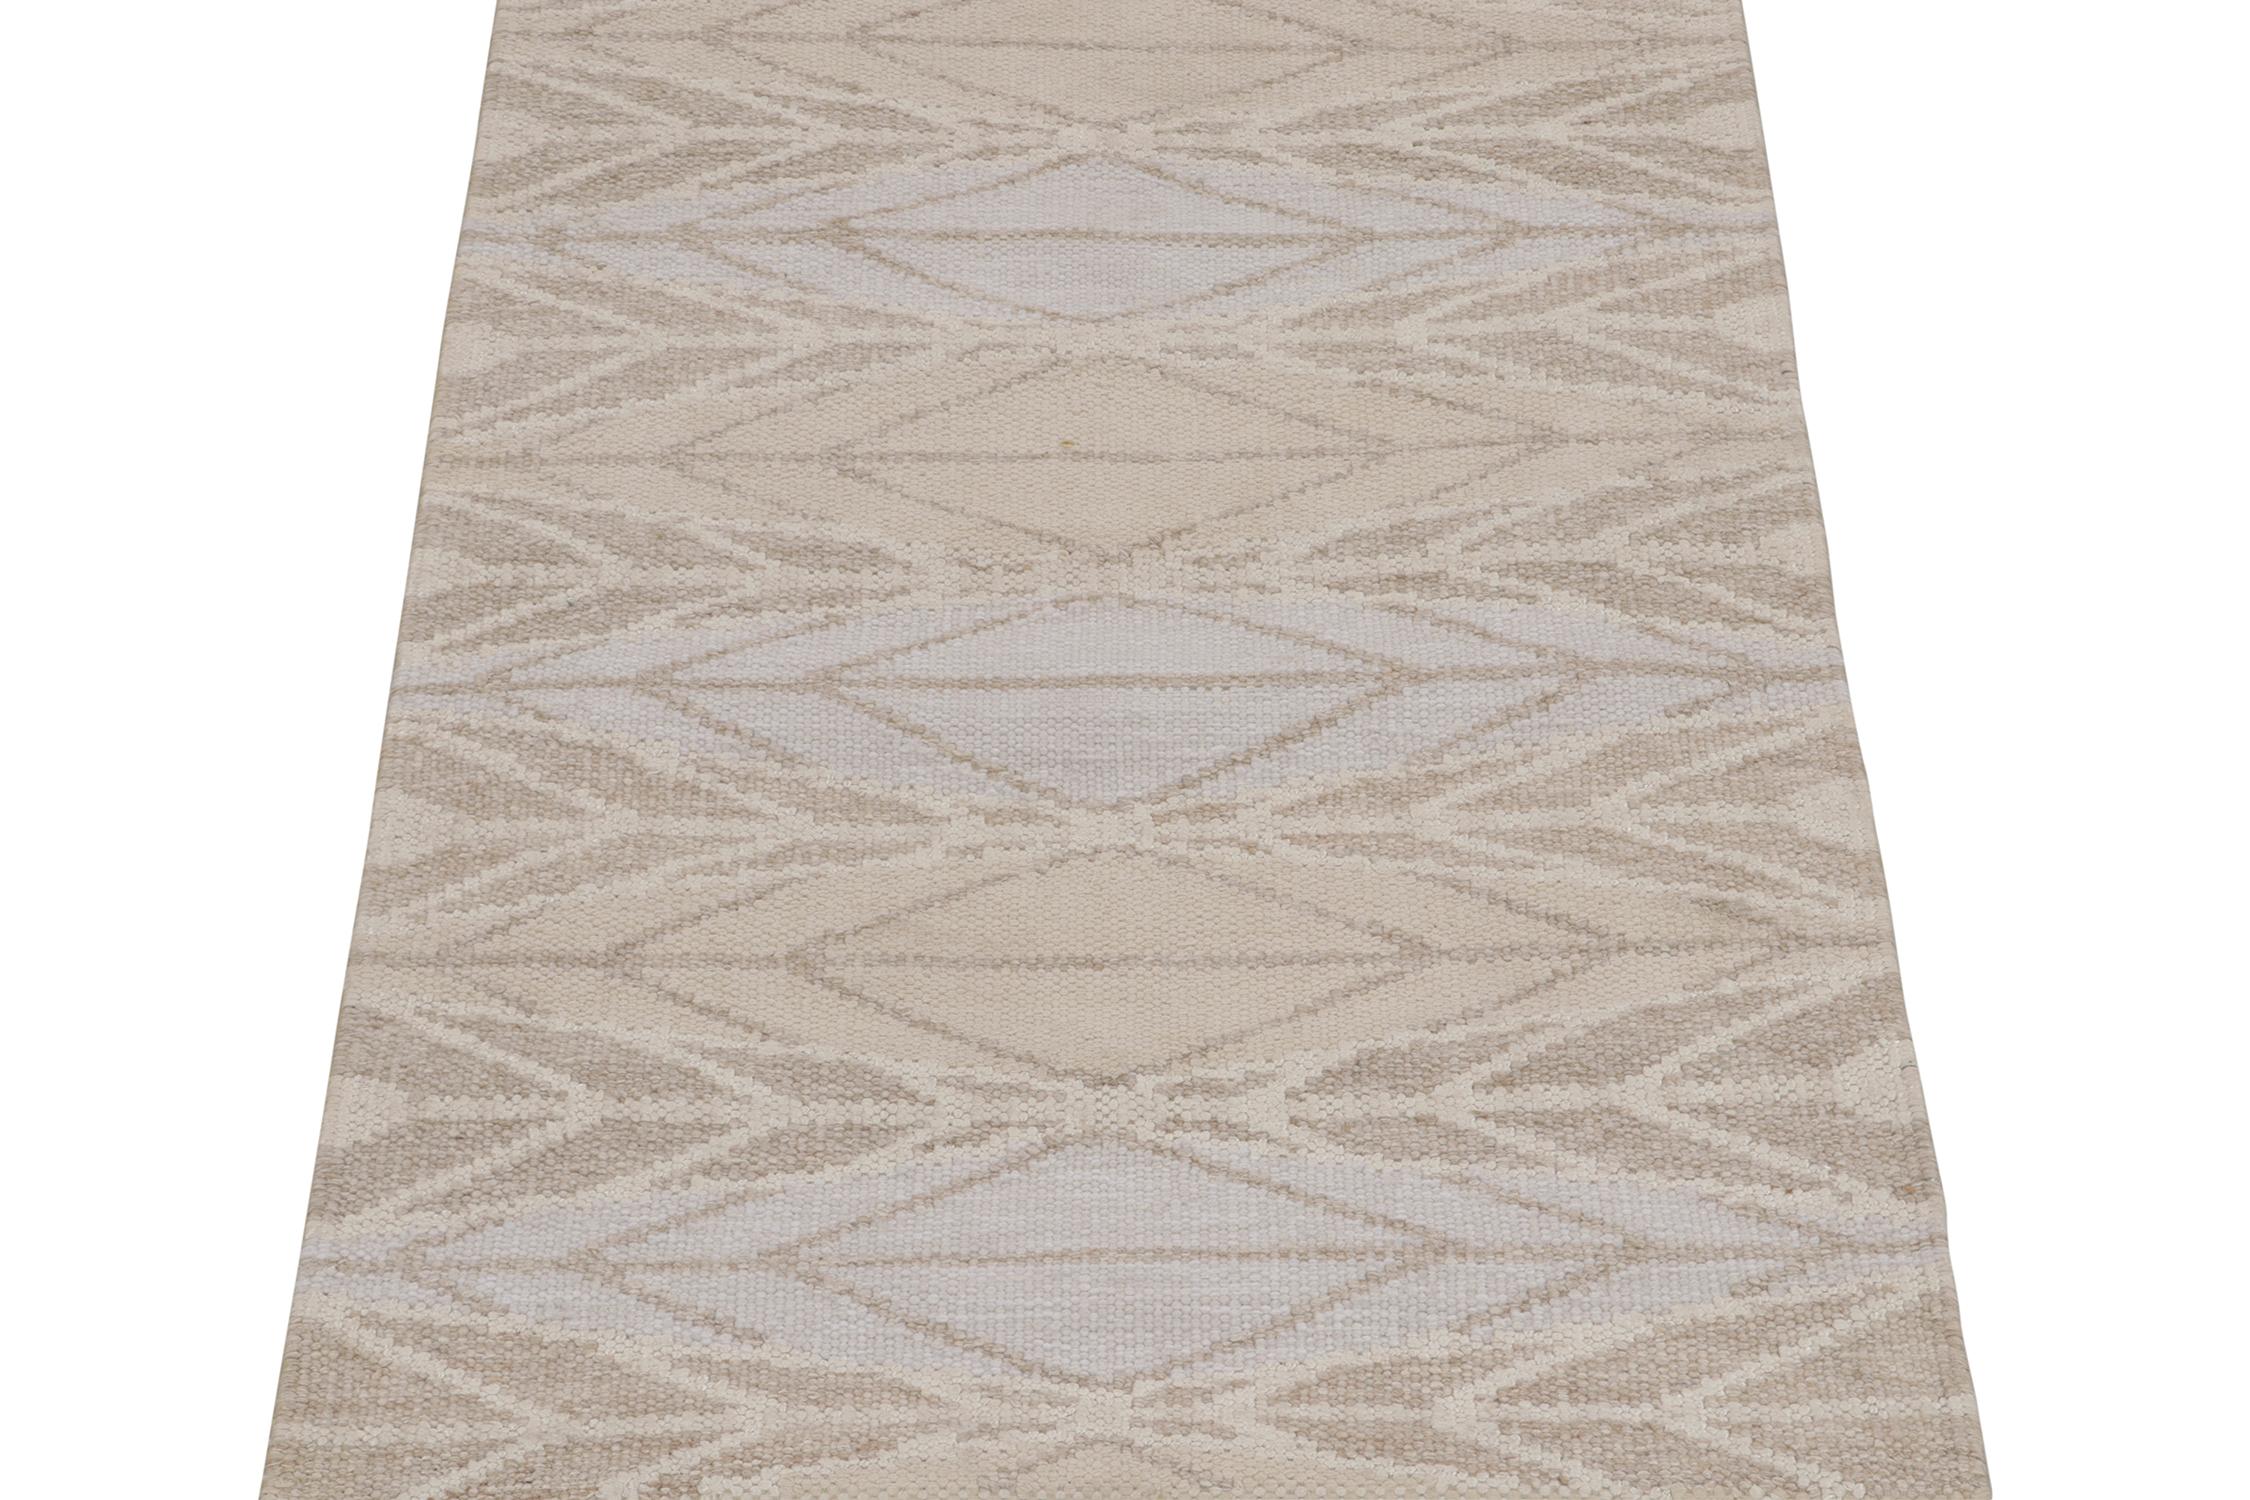 A smart 3x5 Swedish style kilim from our award-winning Scandinavian flat weave collection. Handwoven in wool. 
On the design: 
This rug enjoys a mesmeric sense of movement with finely detailed geometric patterns in beige, white, gray, and blue.